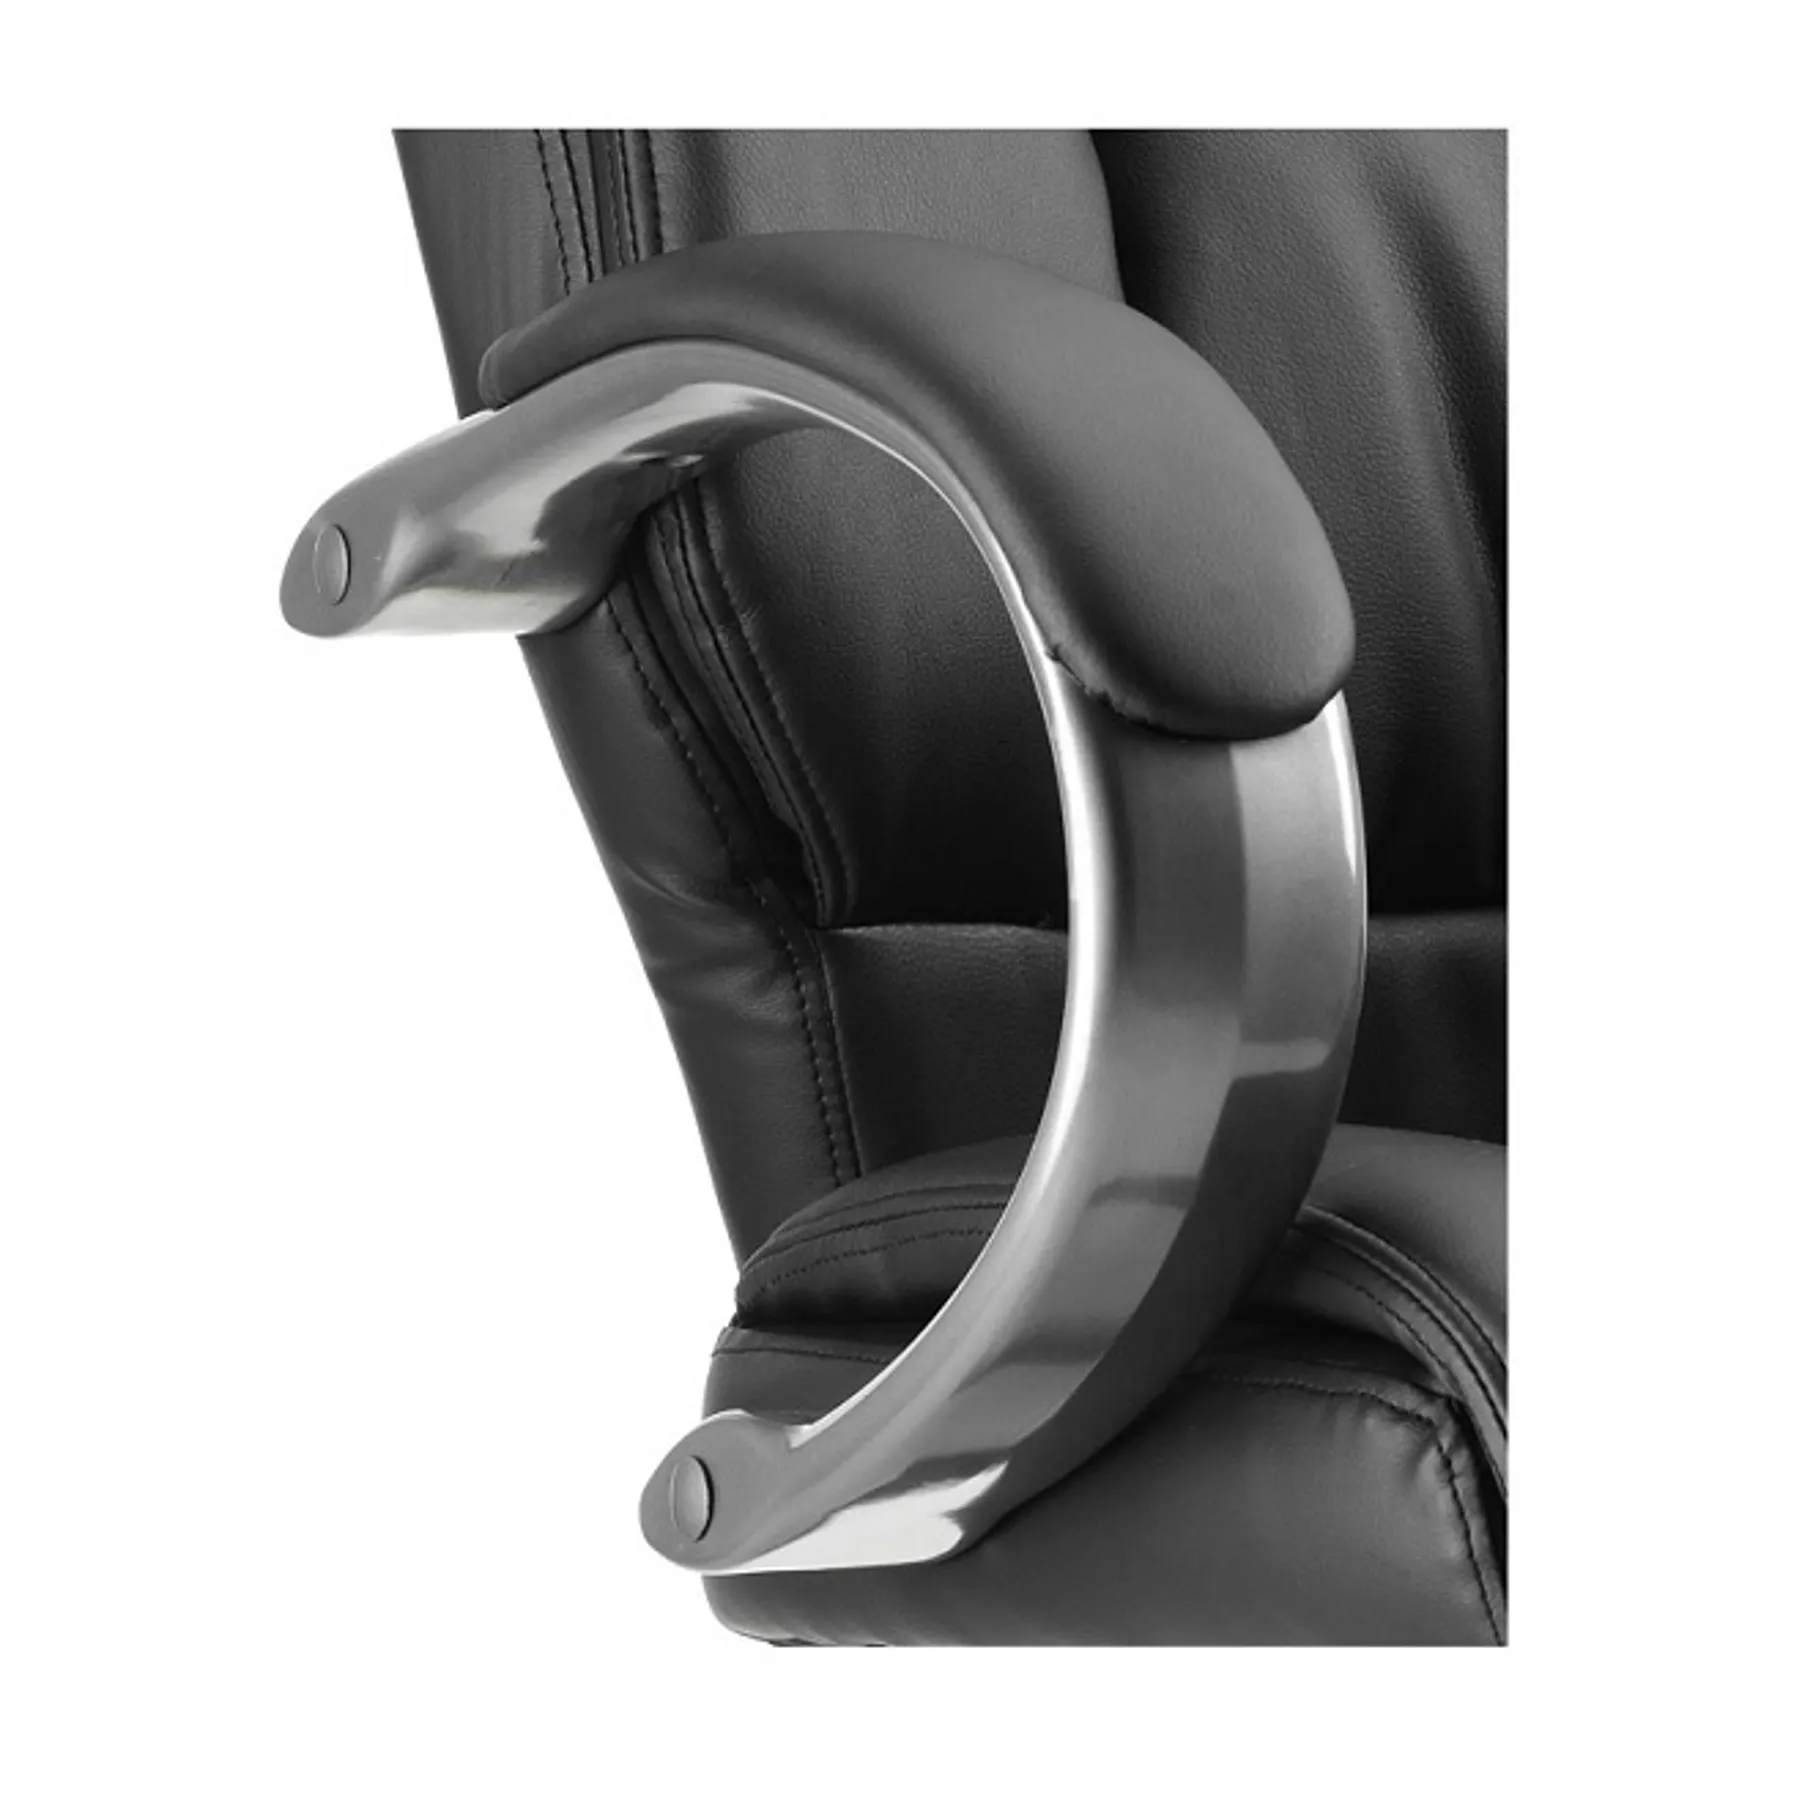 Lof Direct Dynamic galloway black leather executive chair arm detail